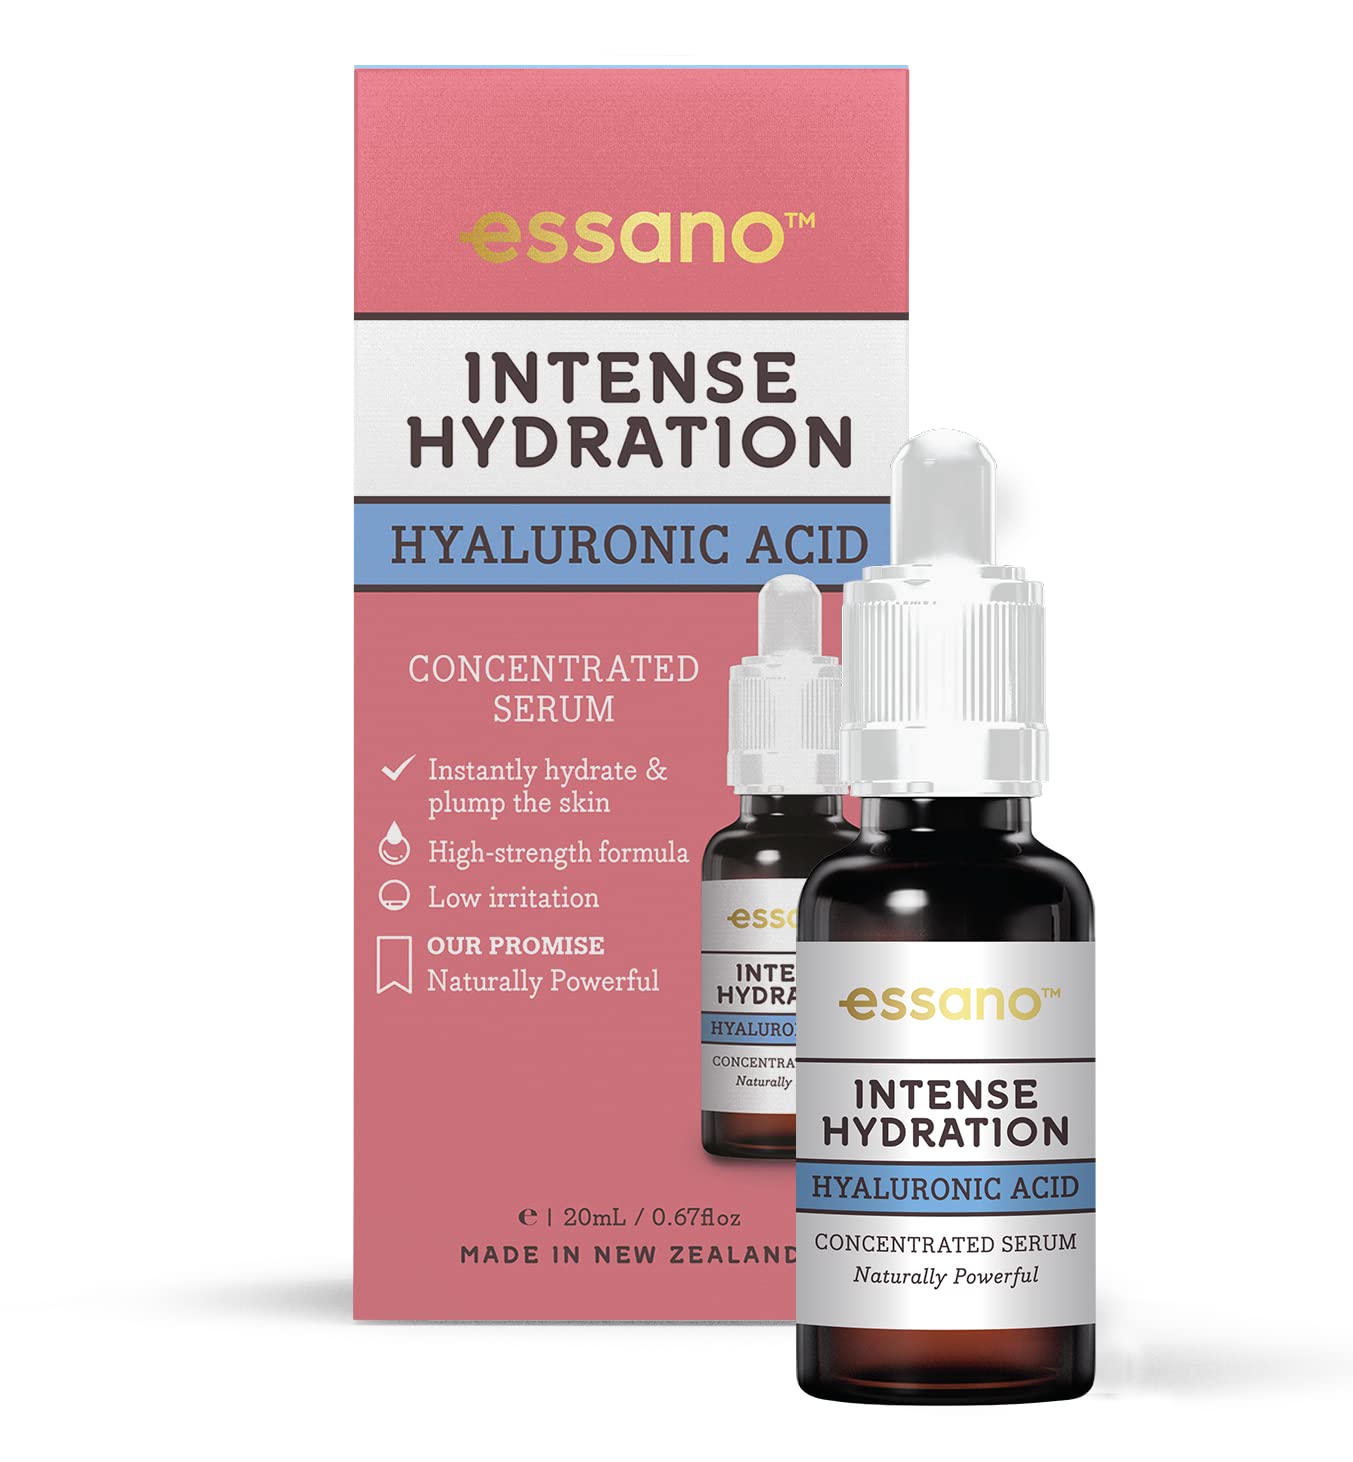 Essano Intense Hydration Hyaluronic Acid Concentrated Serum, Instantly Hydrating, Boost Moisture Retention, Plump & Smooth Skin Lightweight & Fast Absorbing, Suitable for All Skin Types, Achieve Dewy & Supple Complexion, Cruelty Free Skincare, 20, 0.